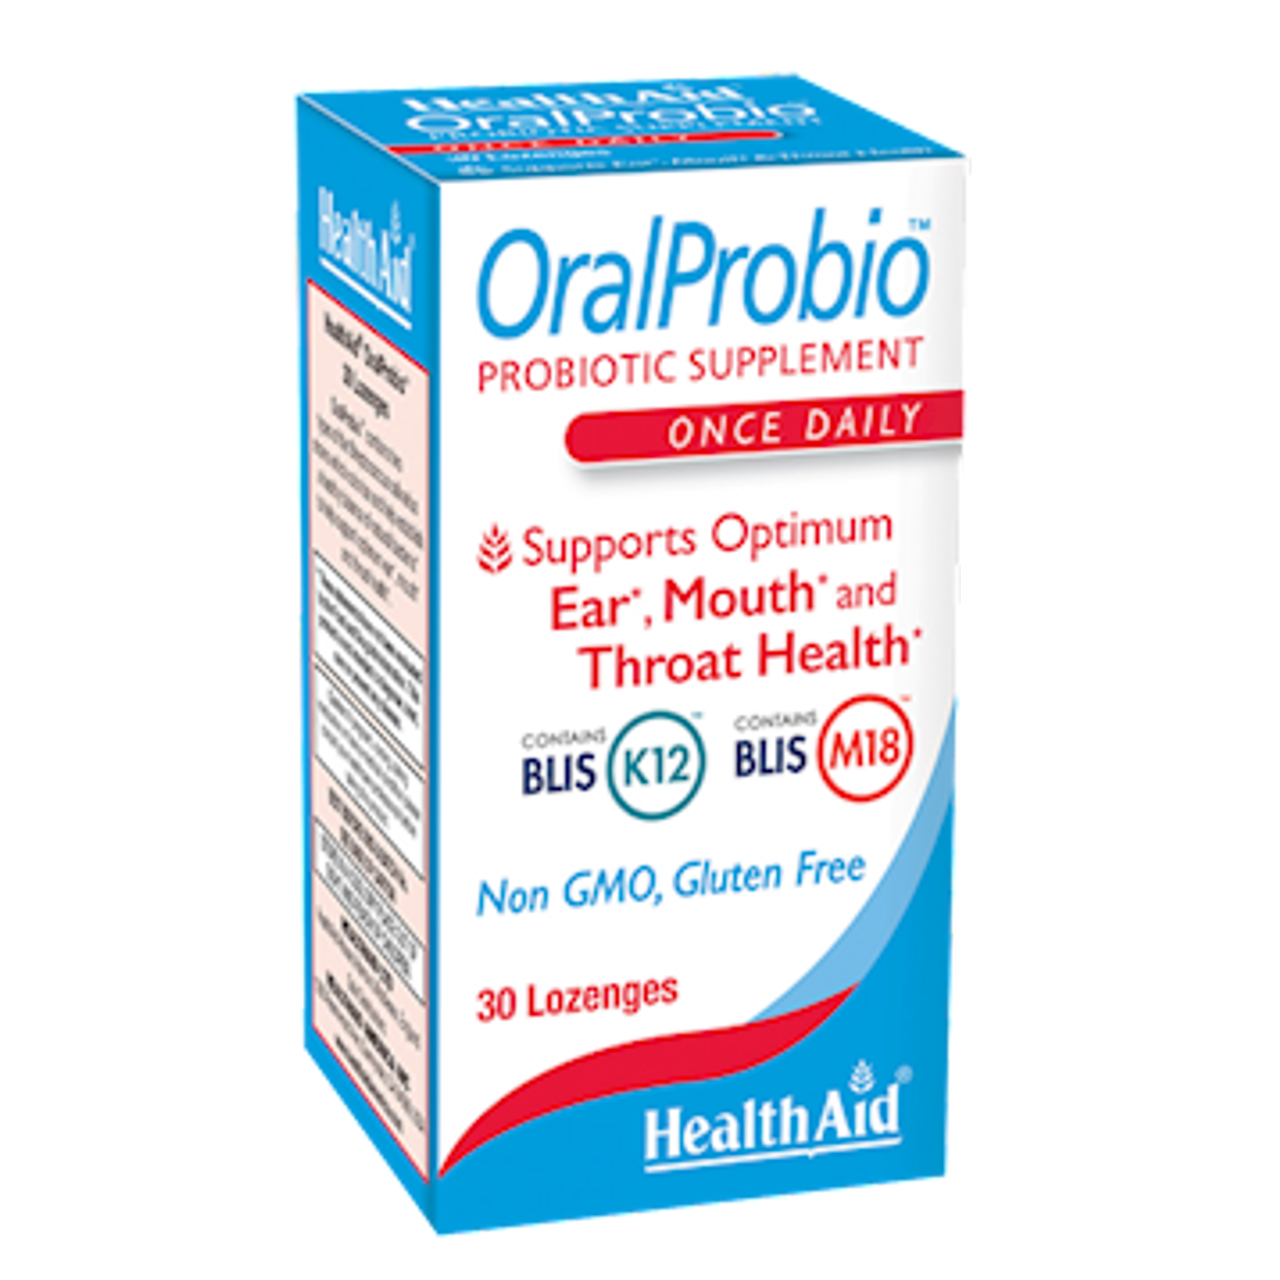 OralProbio 30ct, Once Daily Chewable Tablets, Supports Optimum Ear, Mouth, and Throat Health, Non GMO, Gluten Free, Contains BLIS K12 & M18